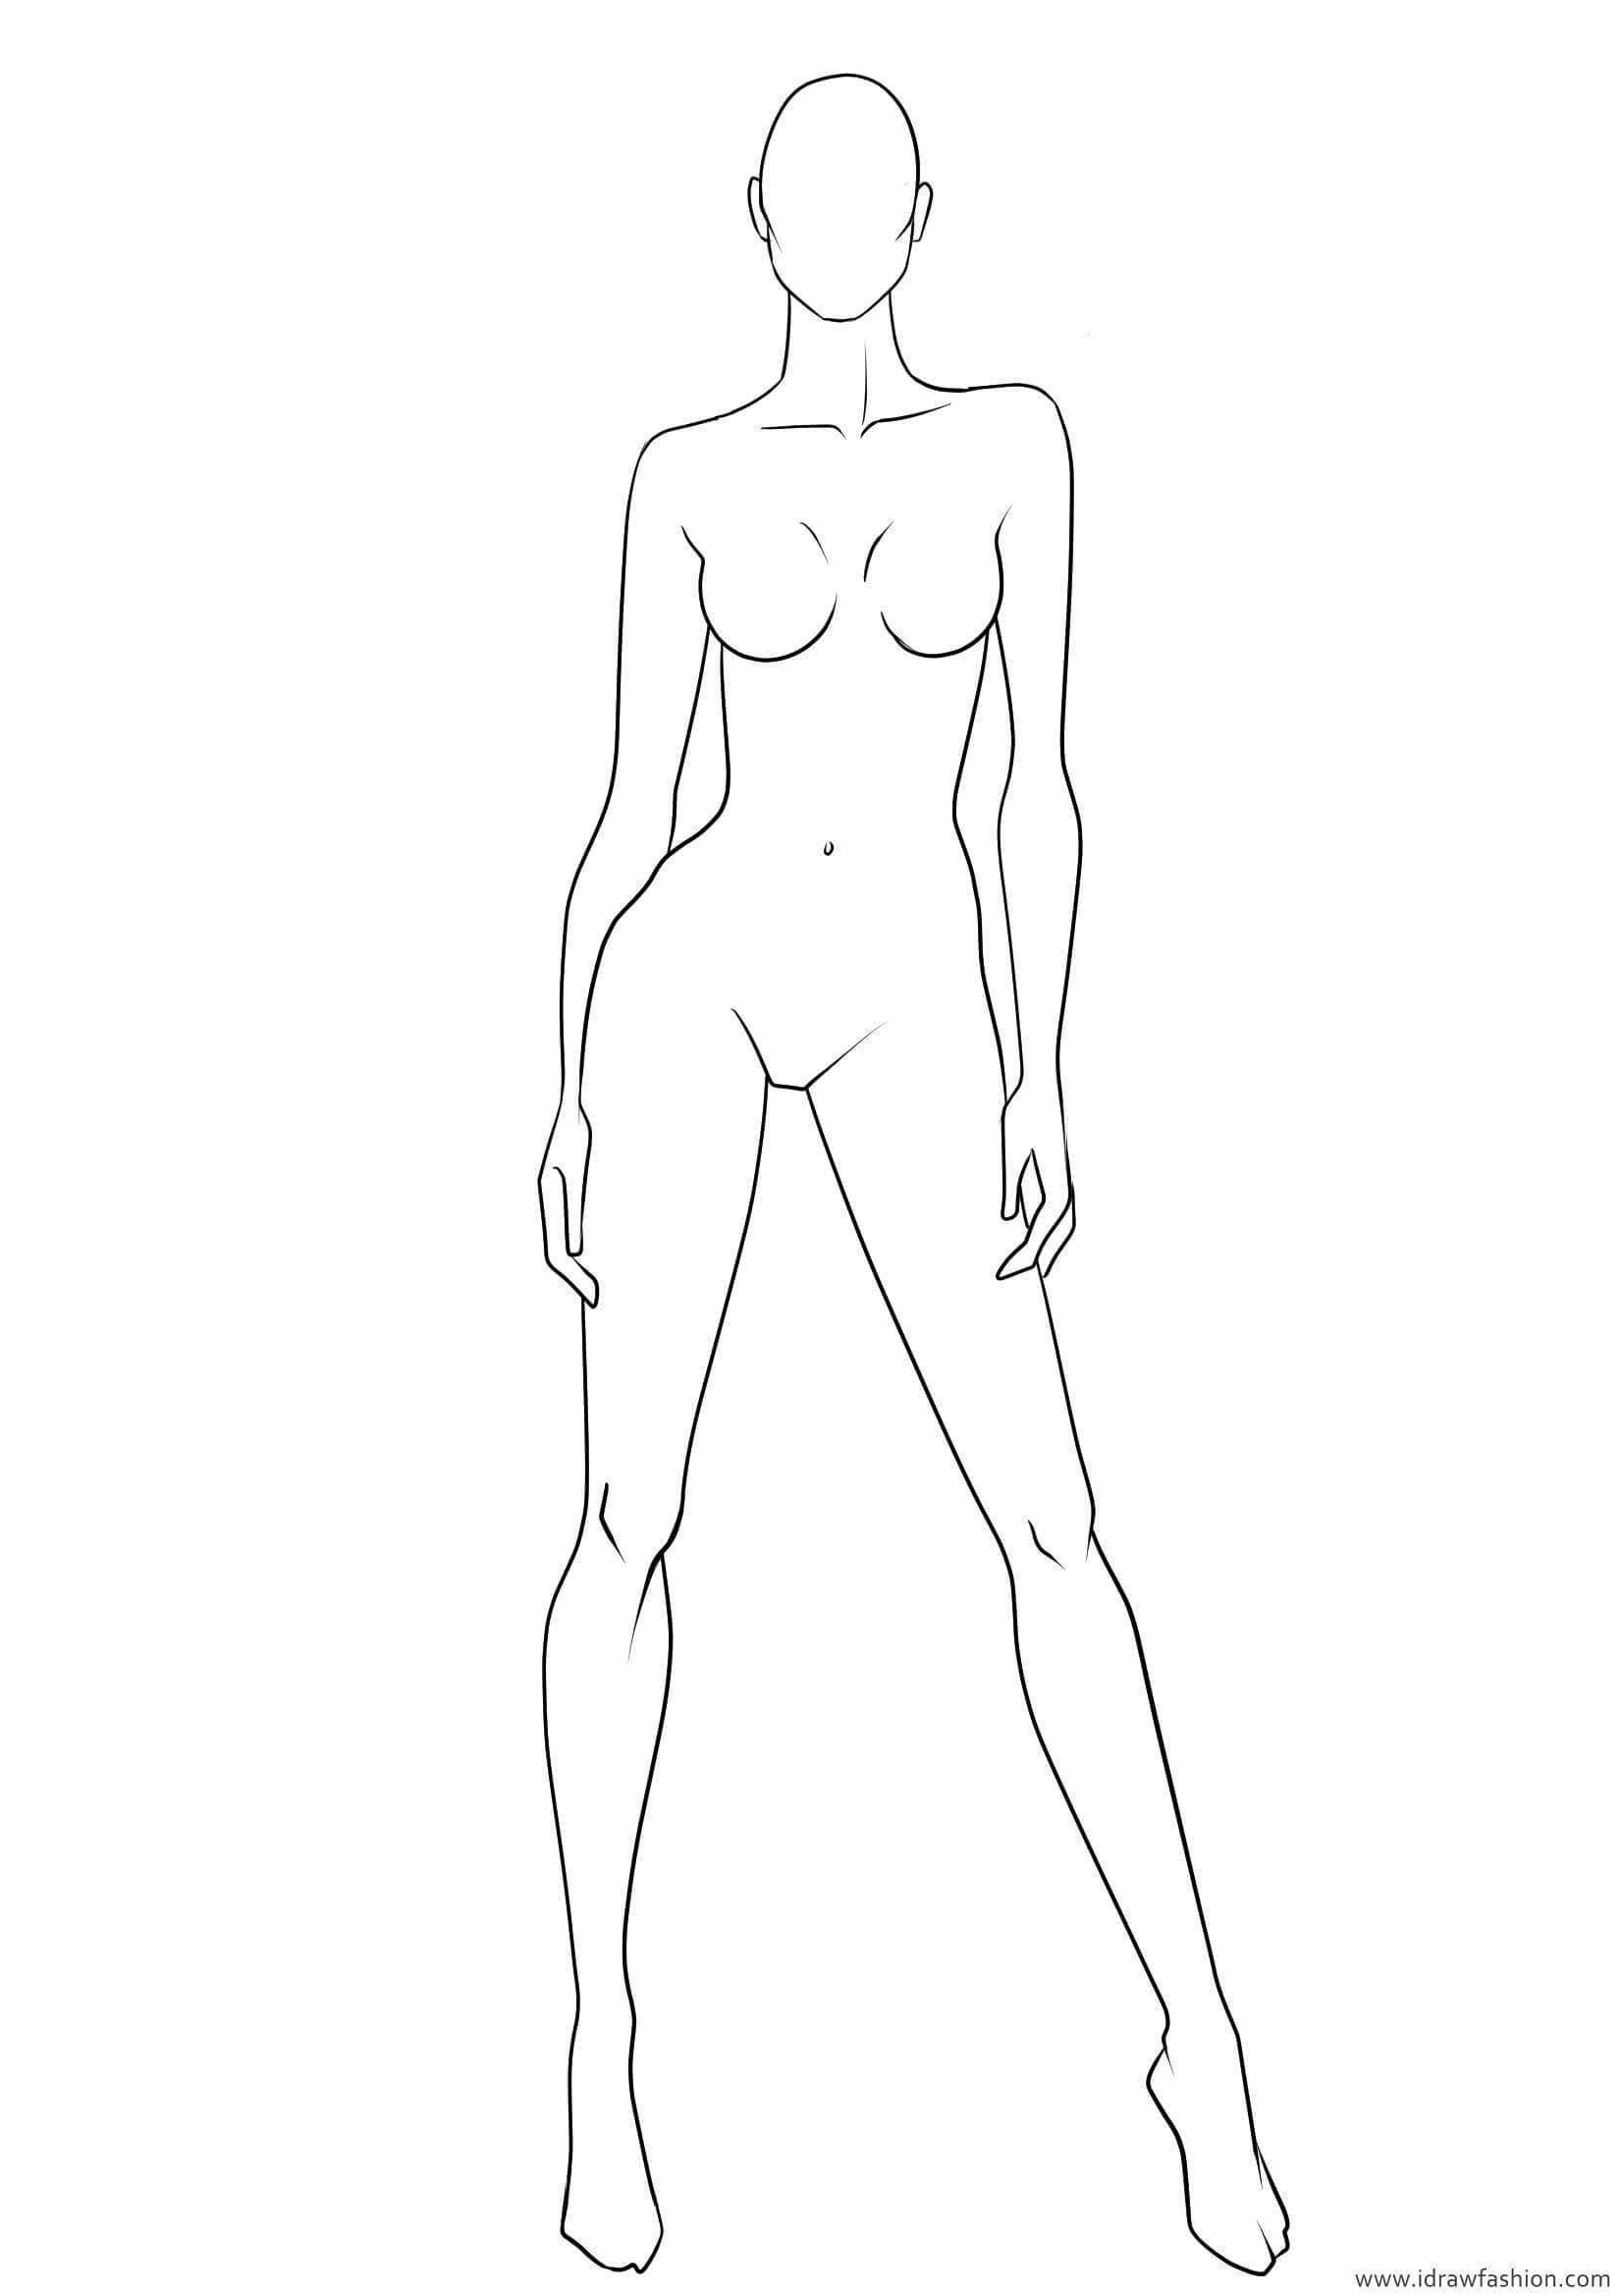 Blank Body Sketch At Paintingvalley | Explore Collection In Blank Model Sketch Template